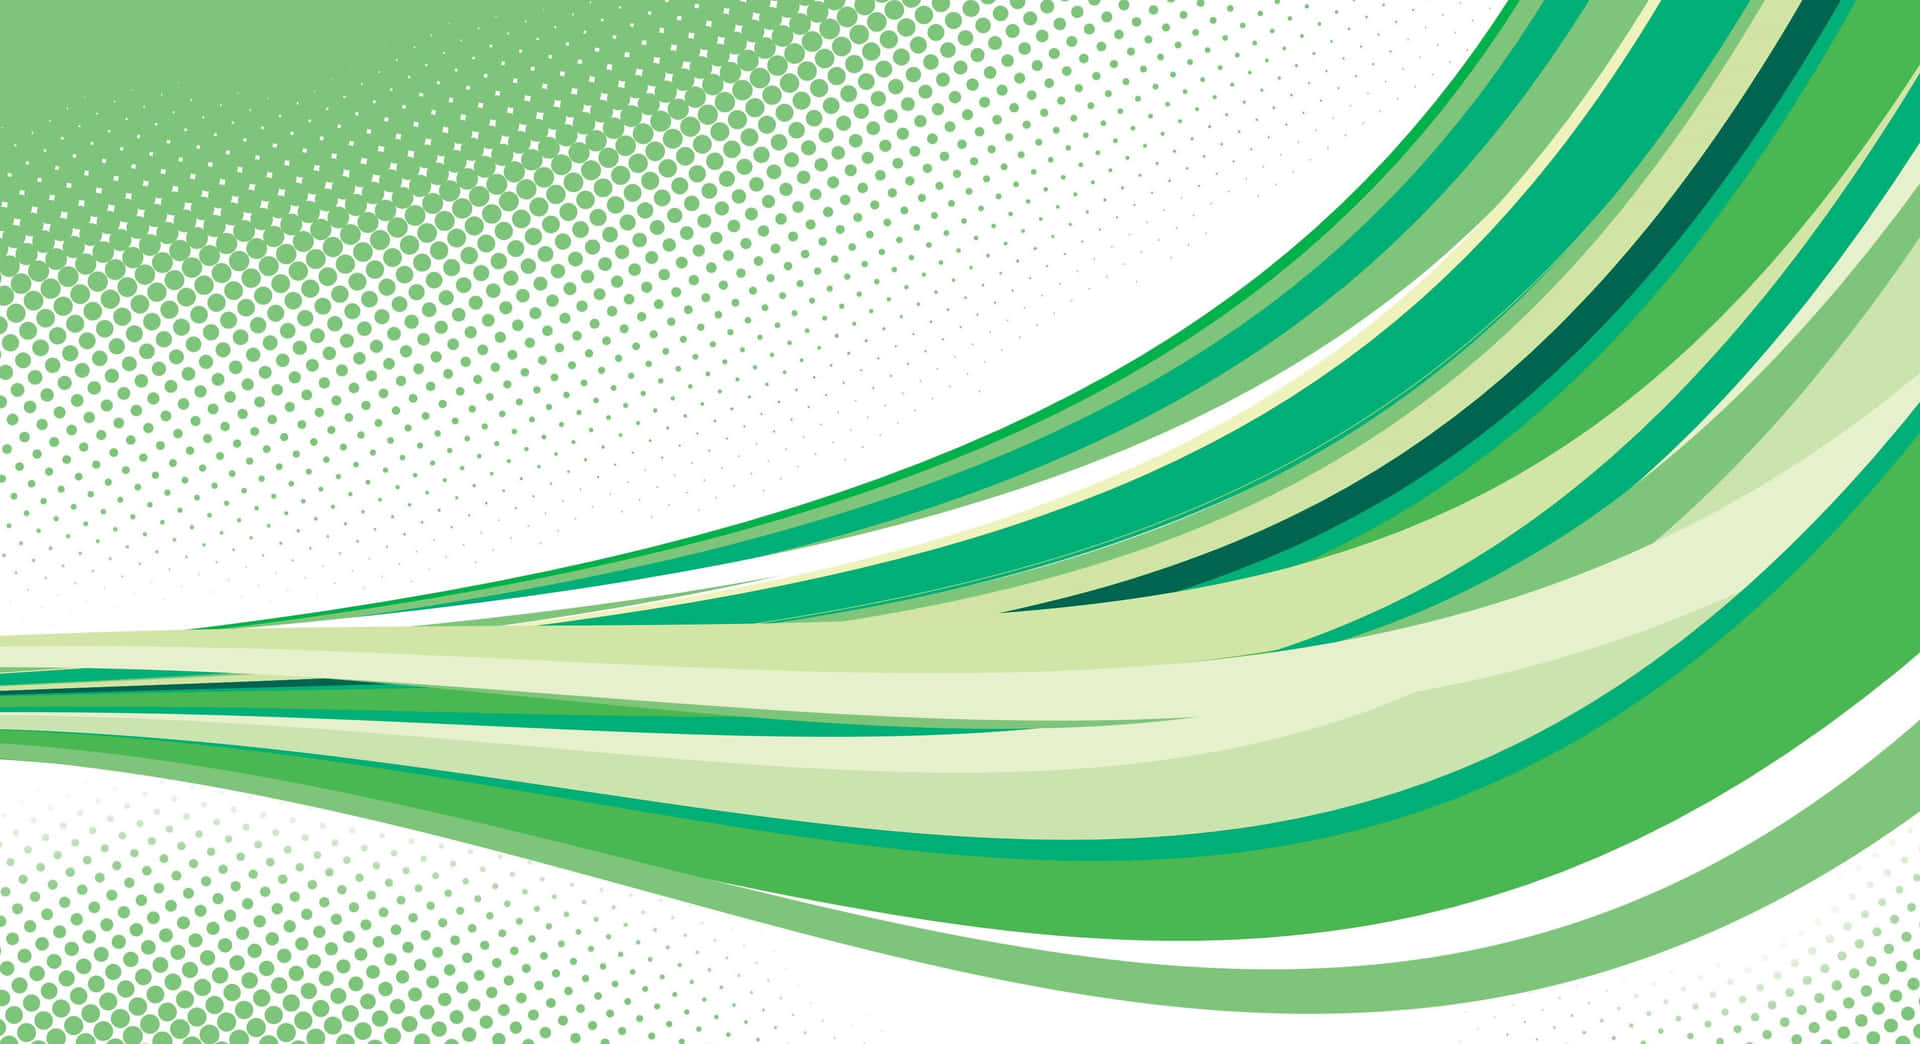 Green And White Waves Vector Background